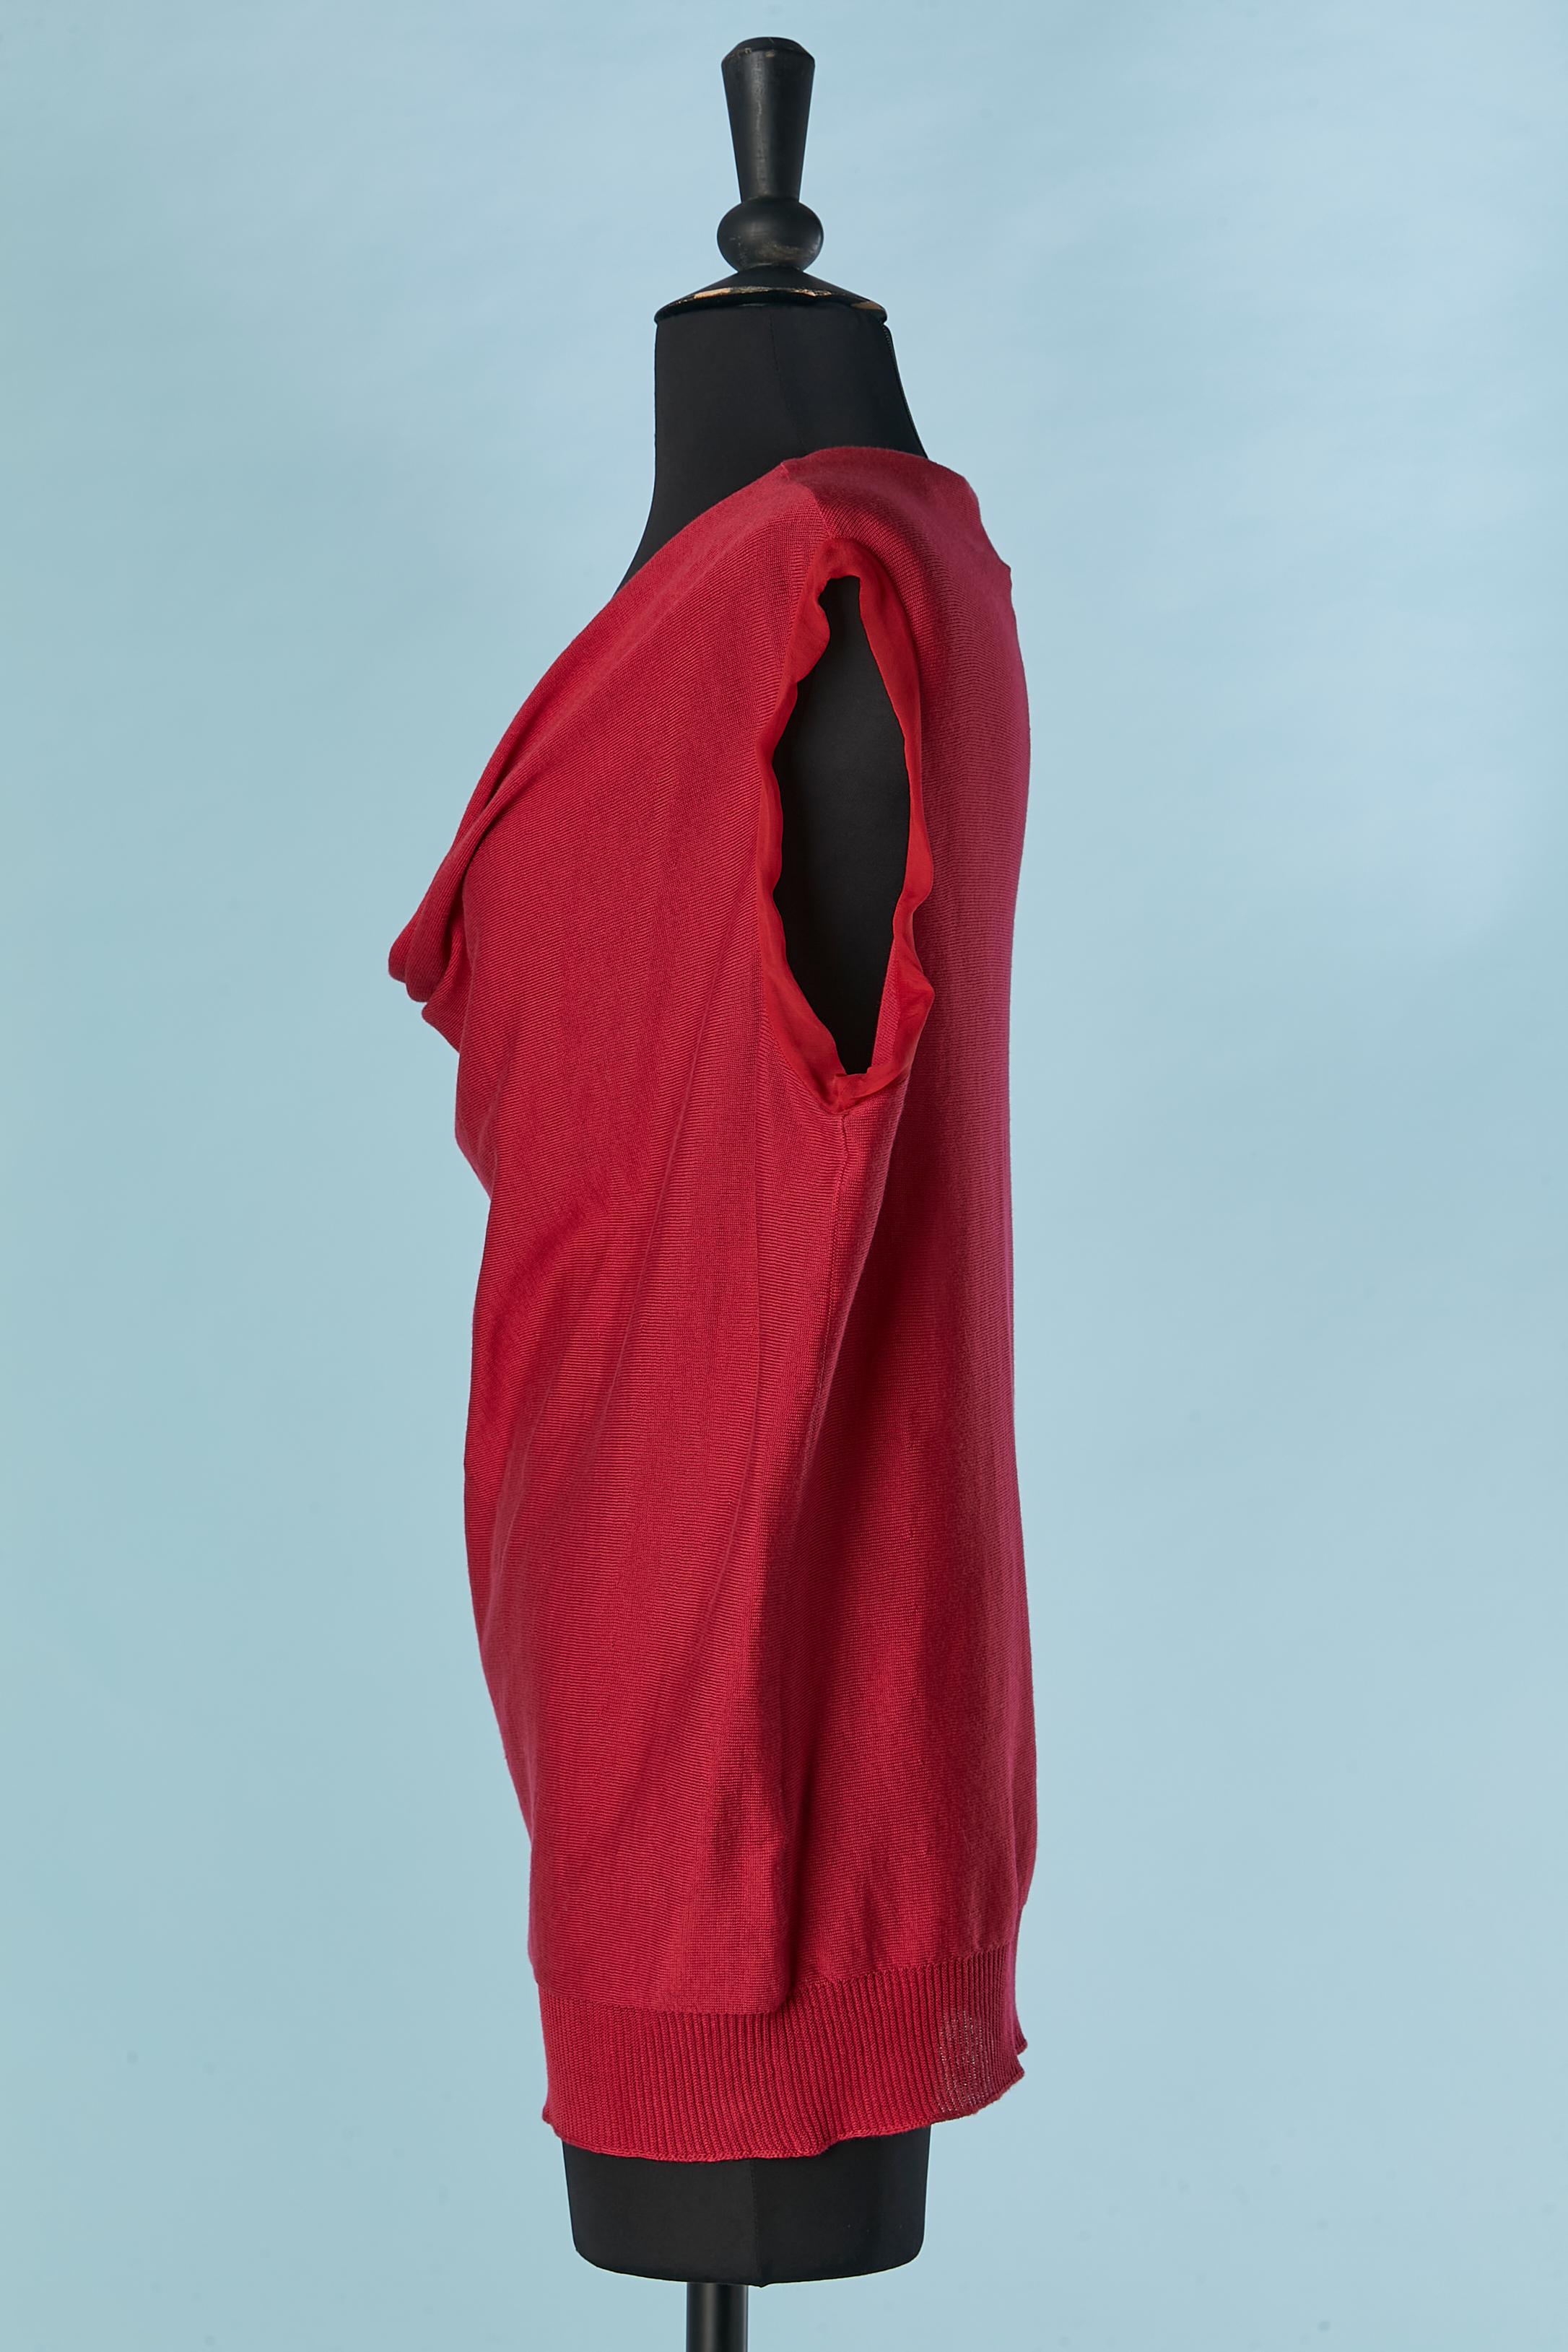 Women's Red silk and cotton sleeveless sweater Lanvin by Alber Elbaz  For Sale